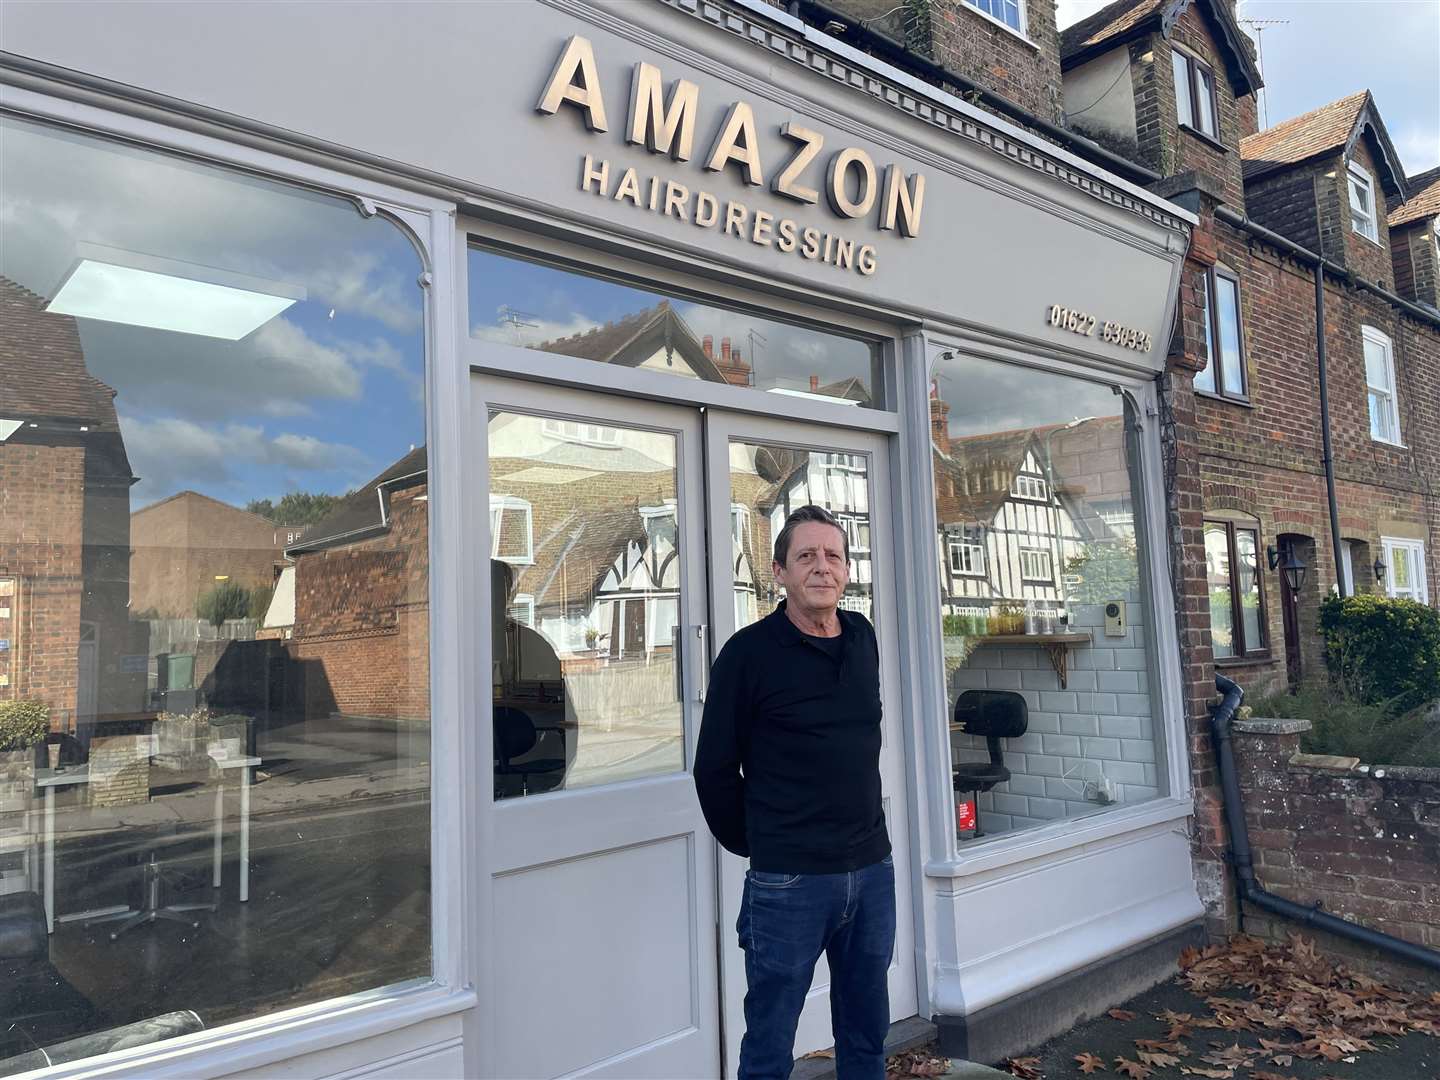 Neal Metcalf was forced to shut Amazon hair salon for three months due to the leak